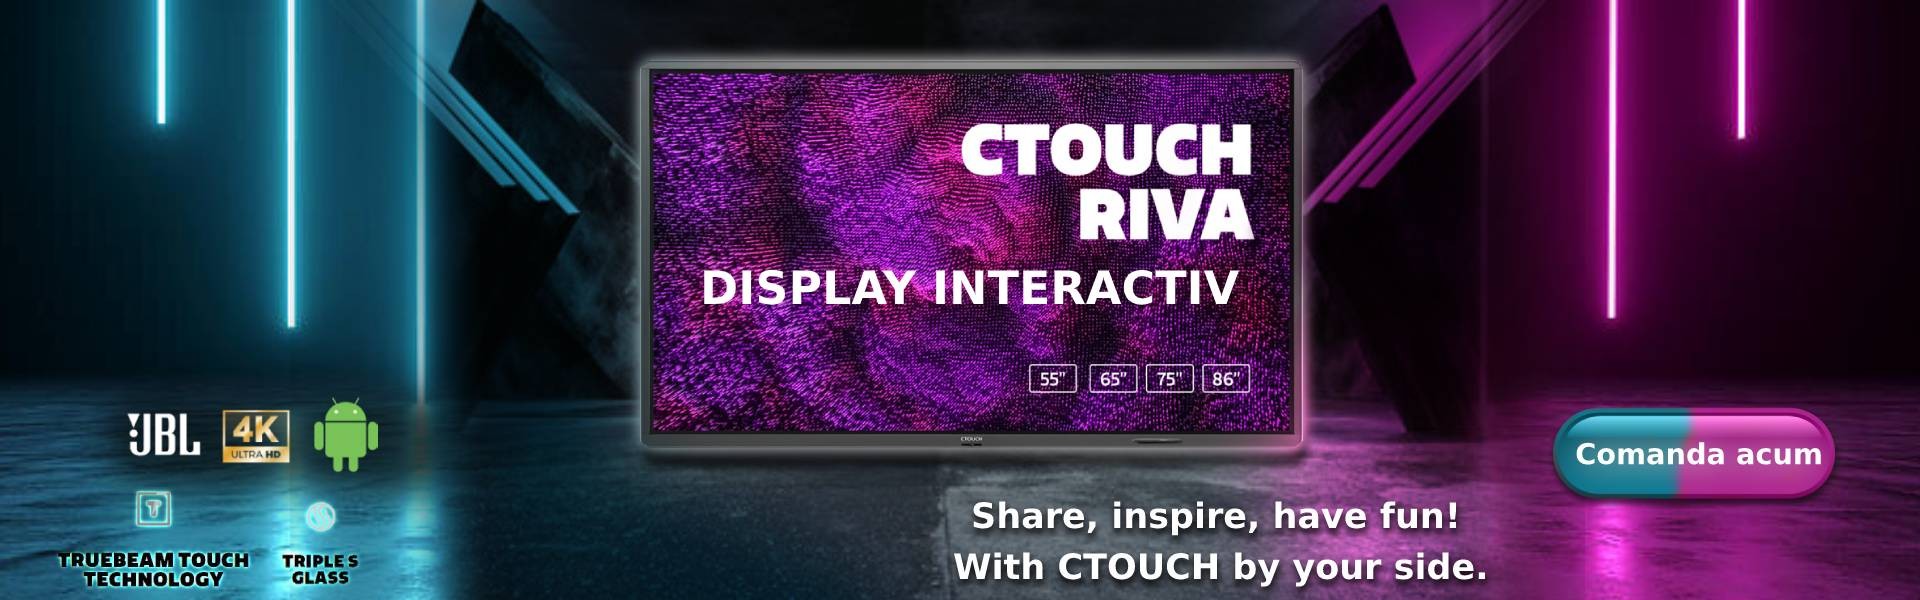 Display interactiv CTOUCH Riva si accesorii